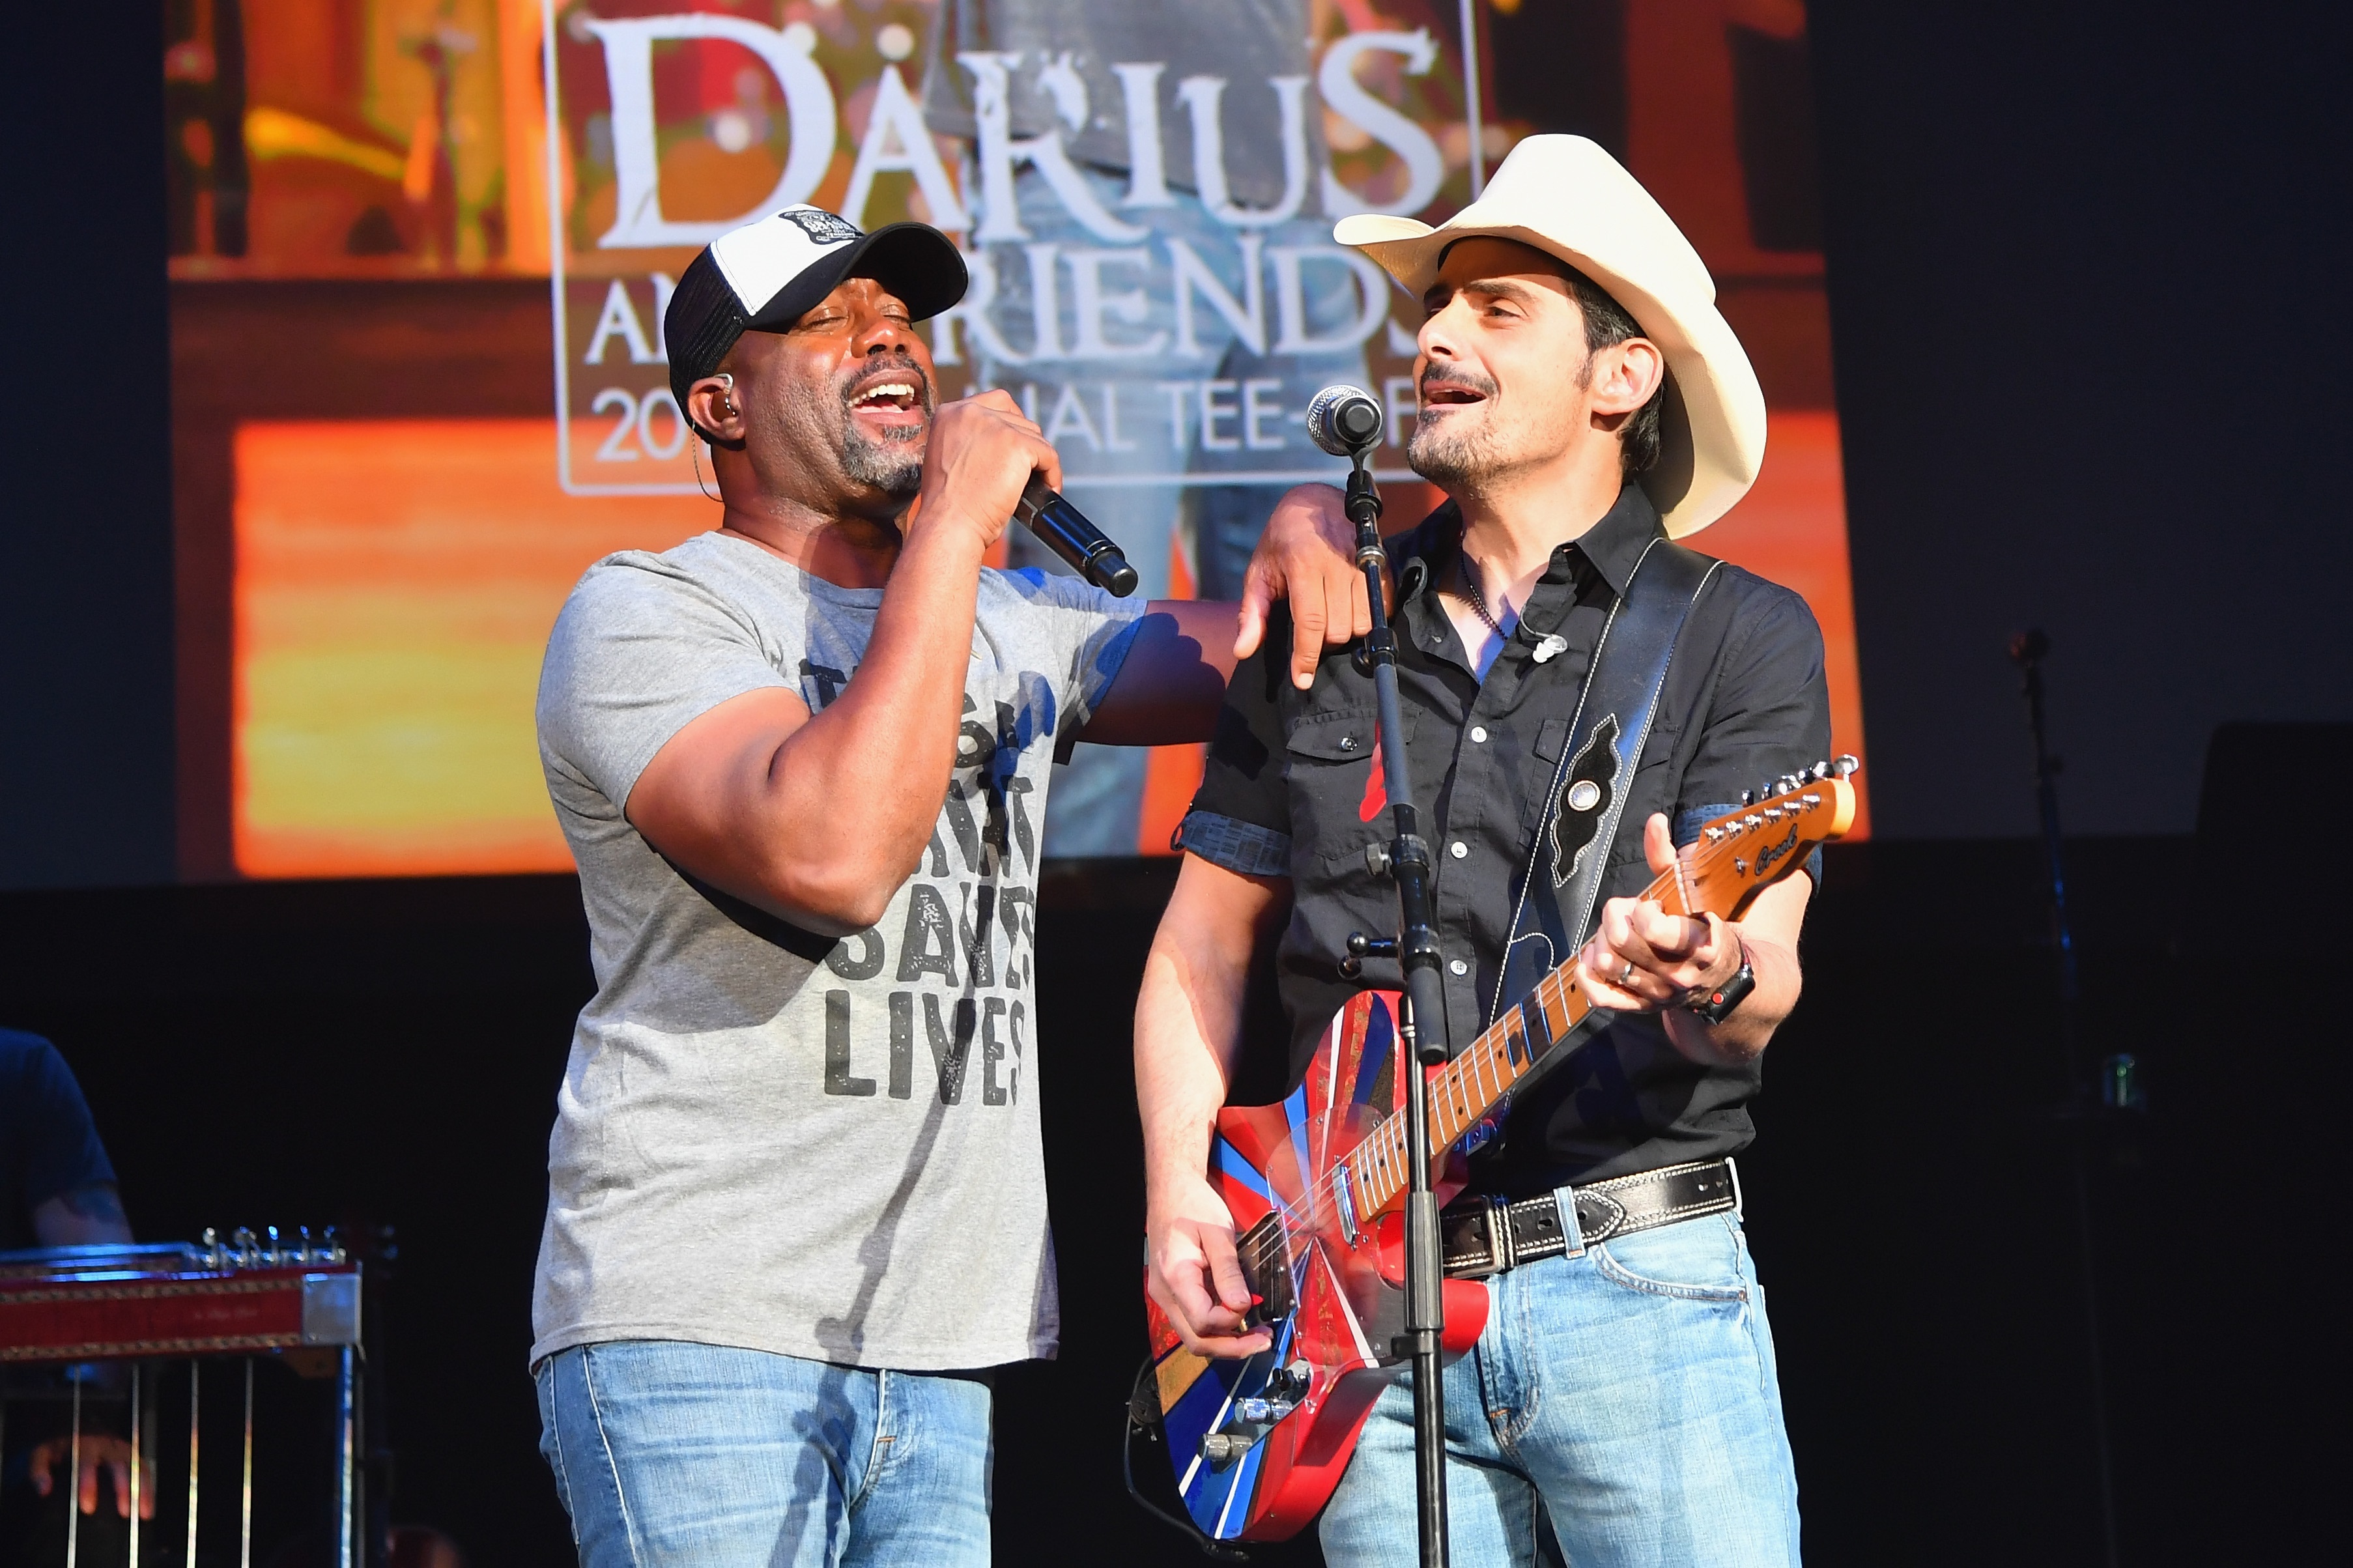 Brad Paisley Tim Mcgraw Darius Rucker And Jimmie Allen Have Family Tradition Jam Sounds Like Nashville